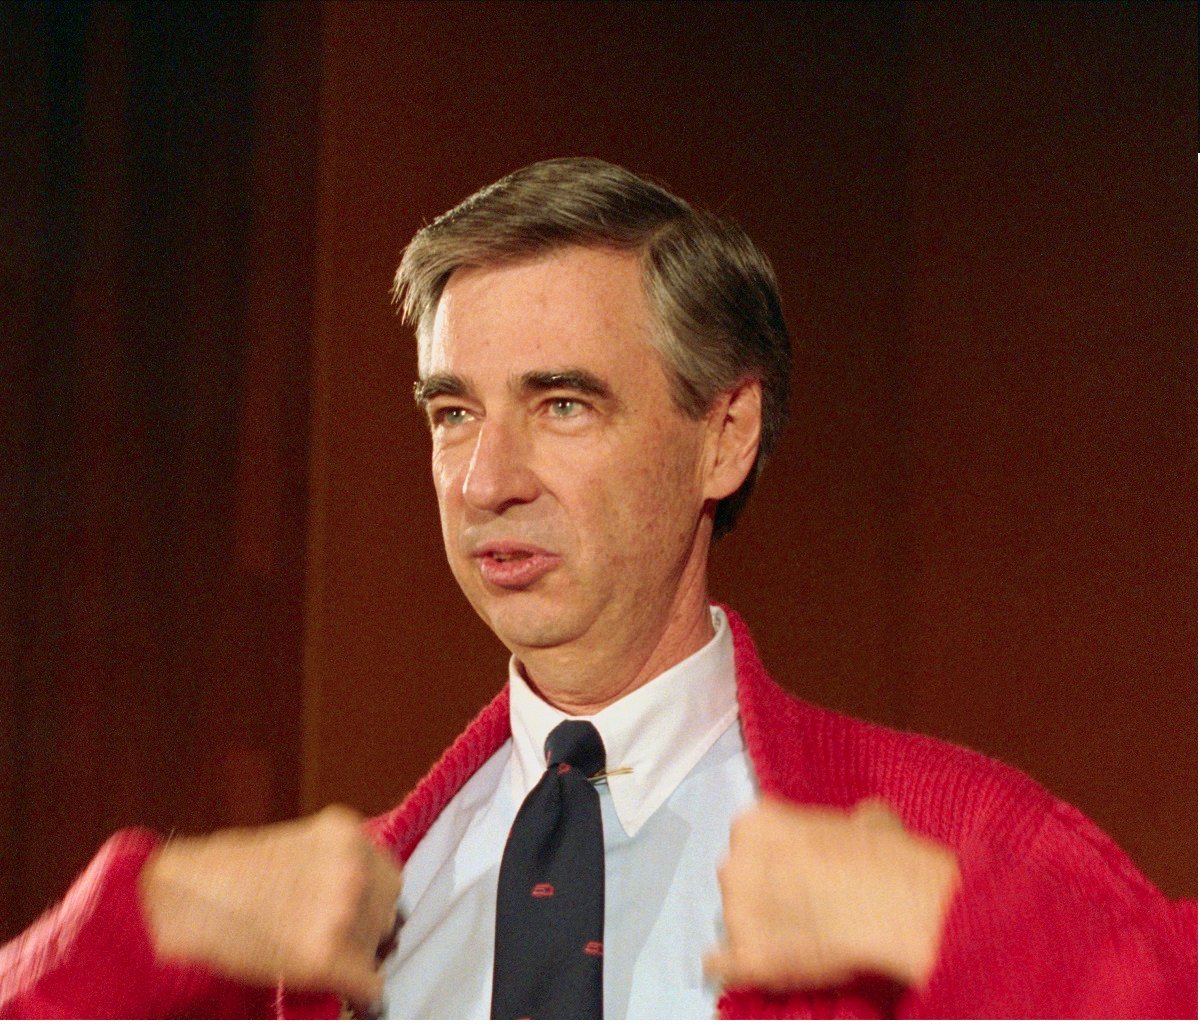 Fred Rogers in his famous red cardigan at an event